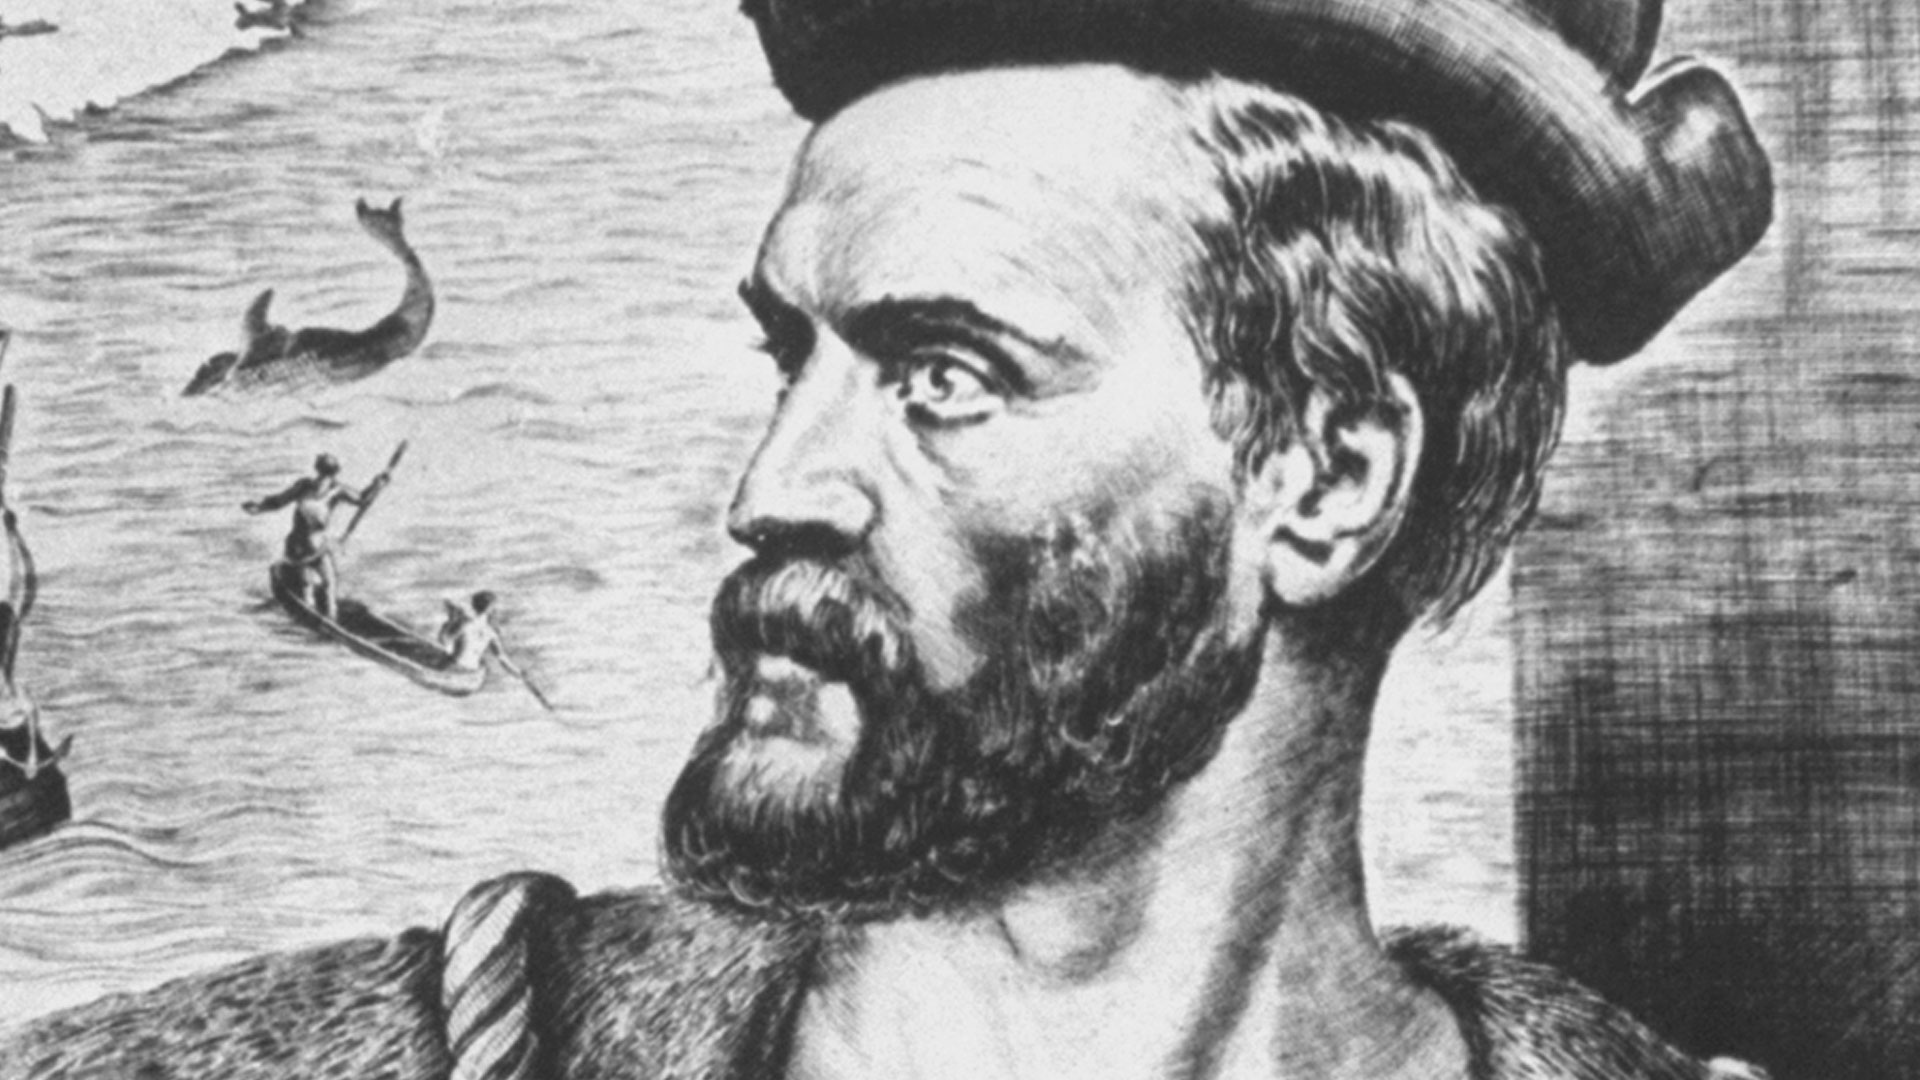 jacques cartier arrived canada